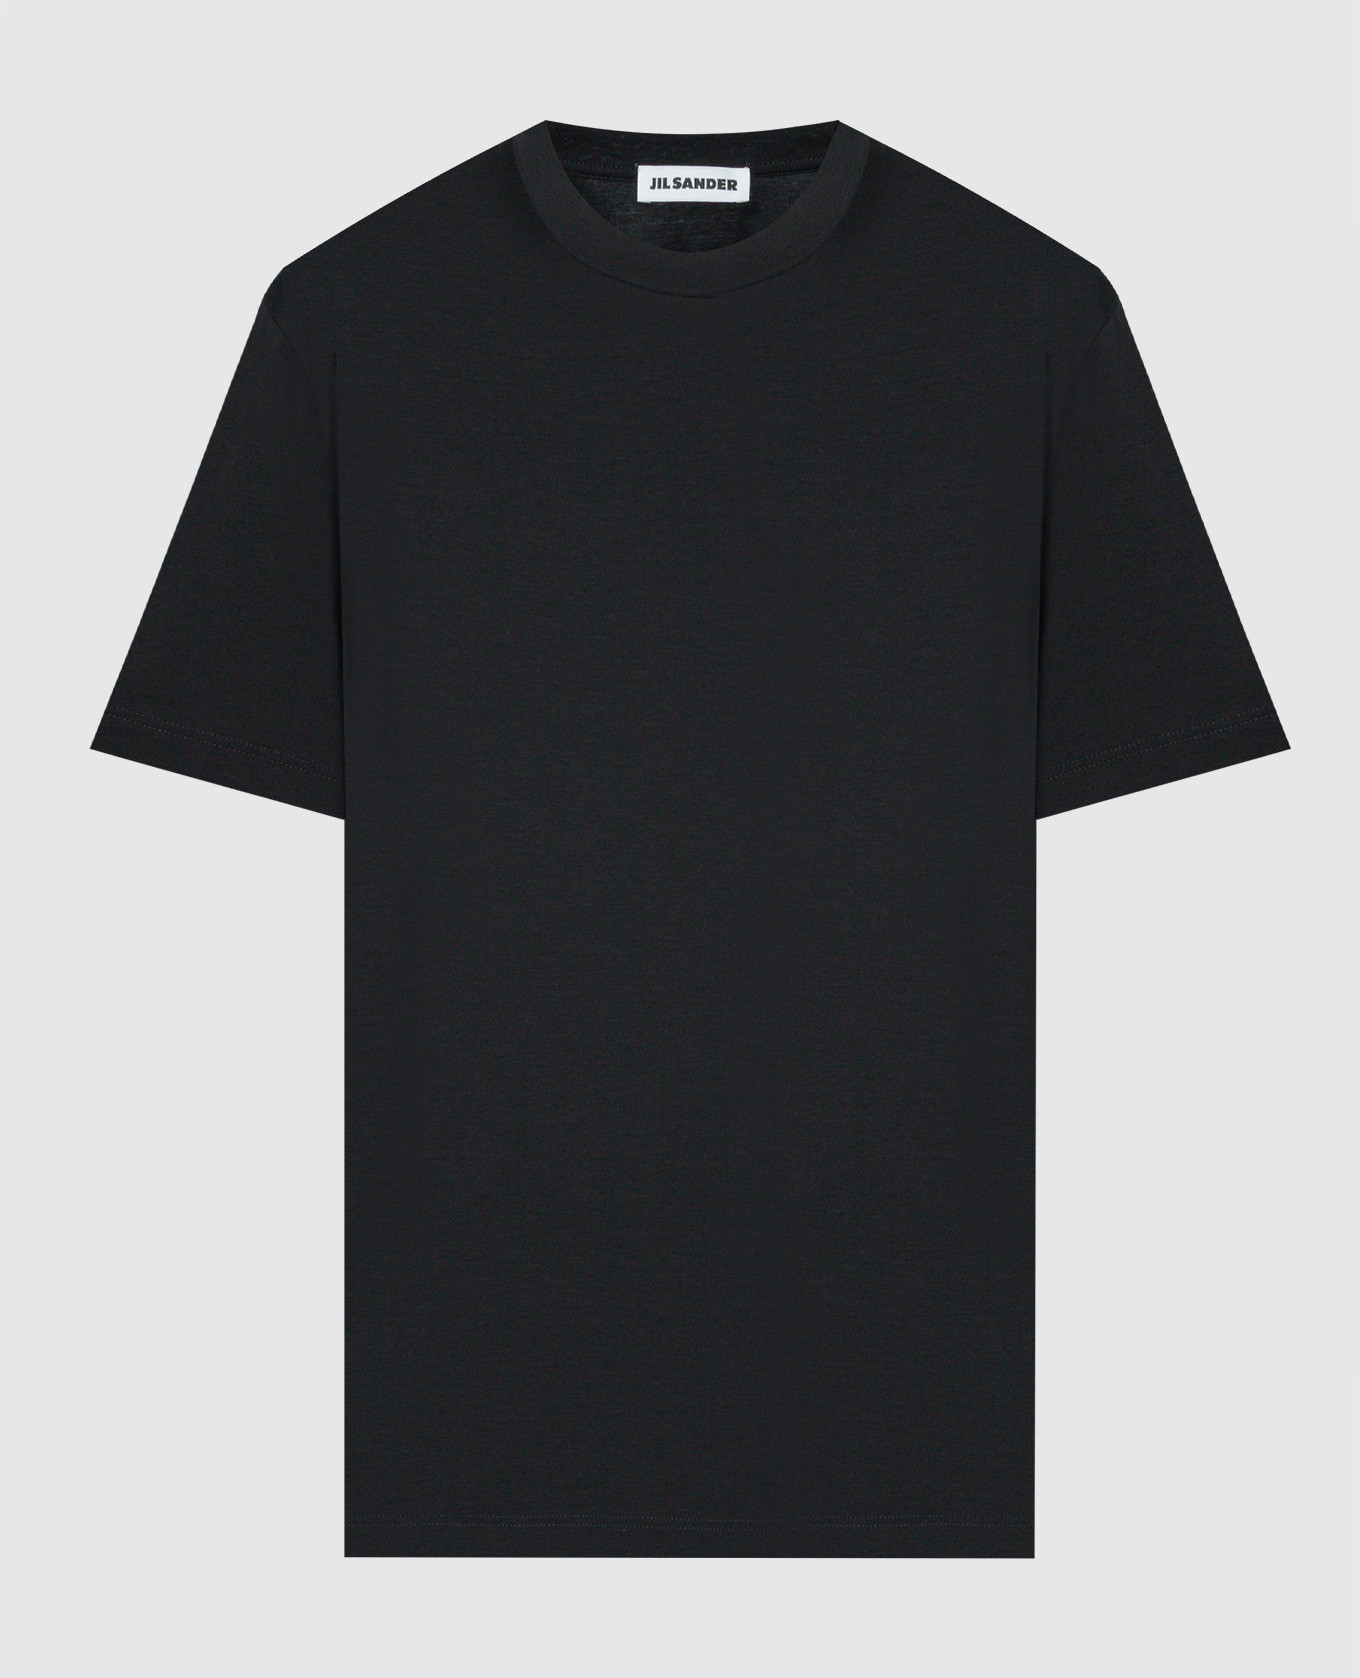 Black T-shirt with a straight cut